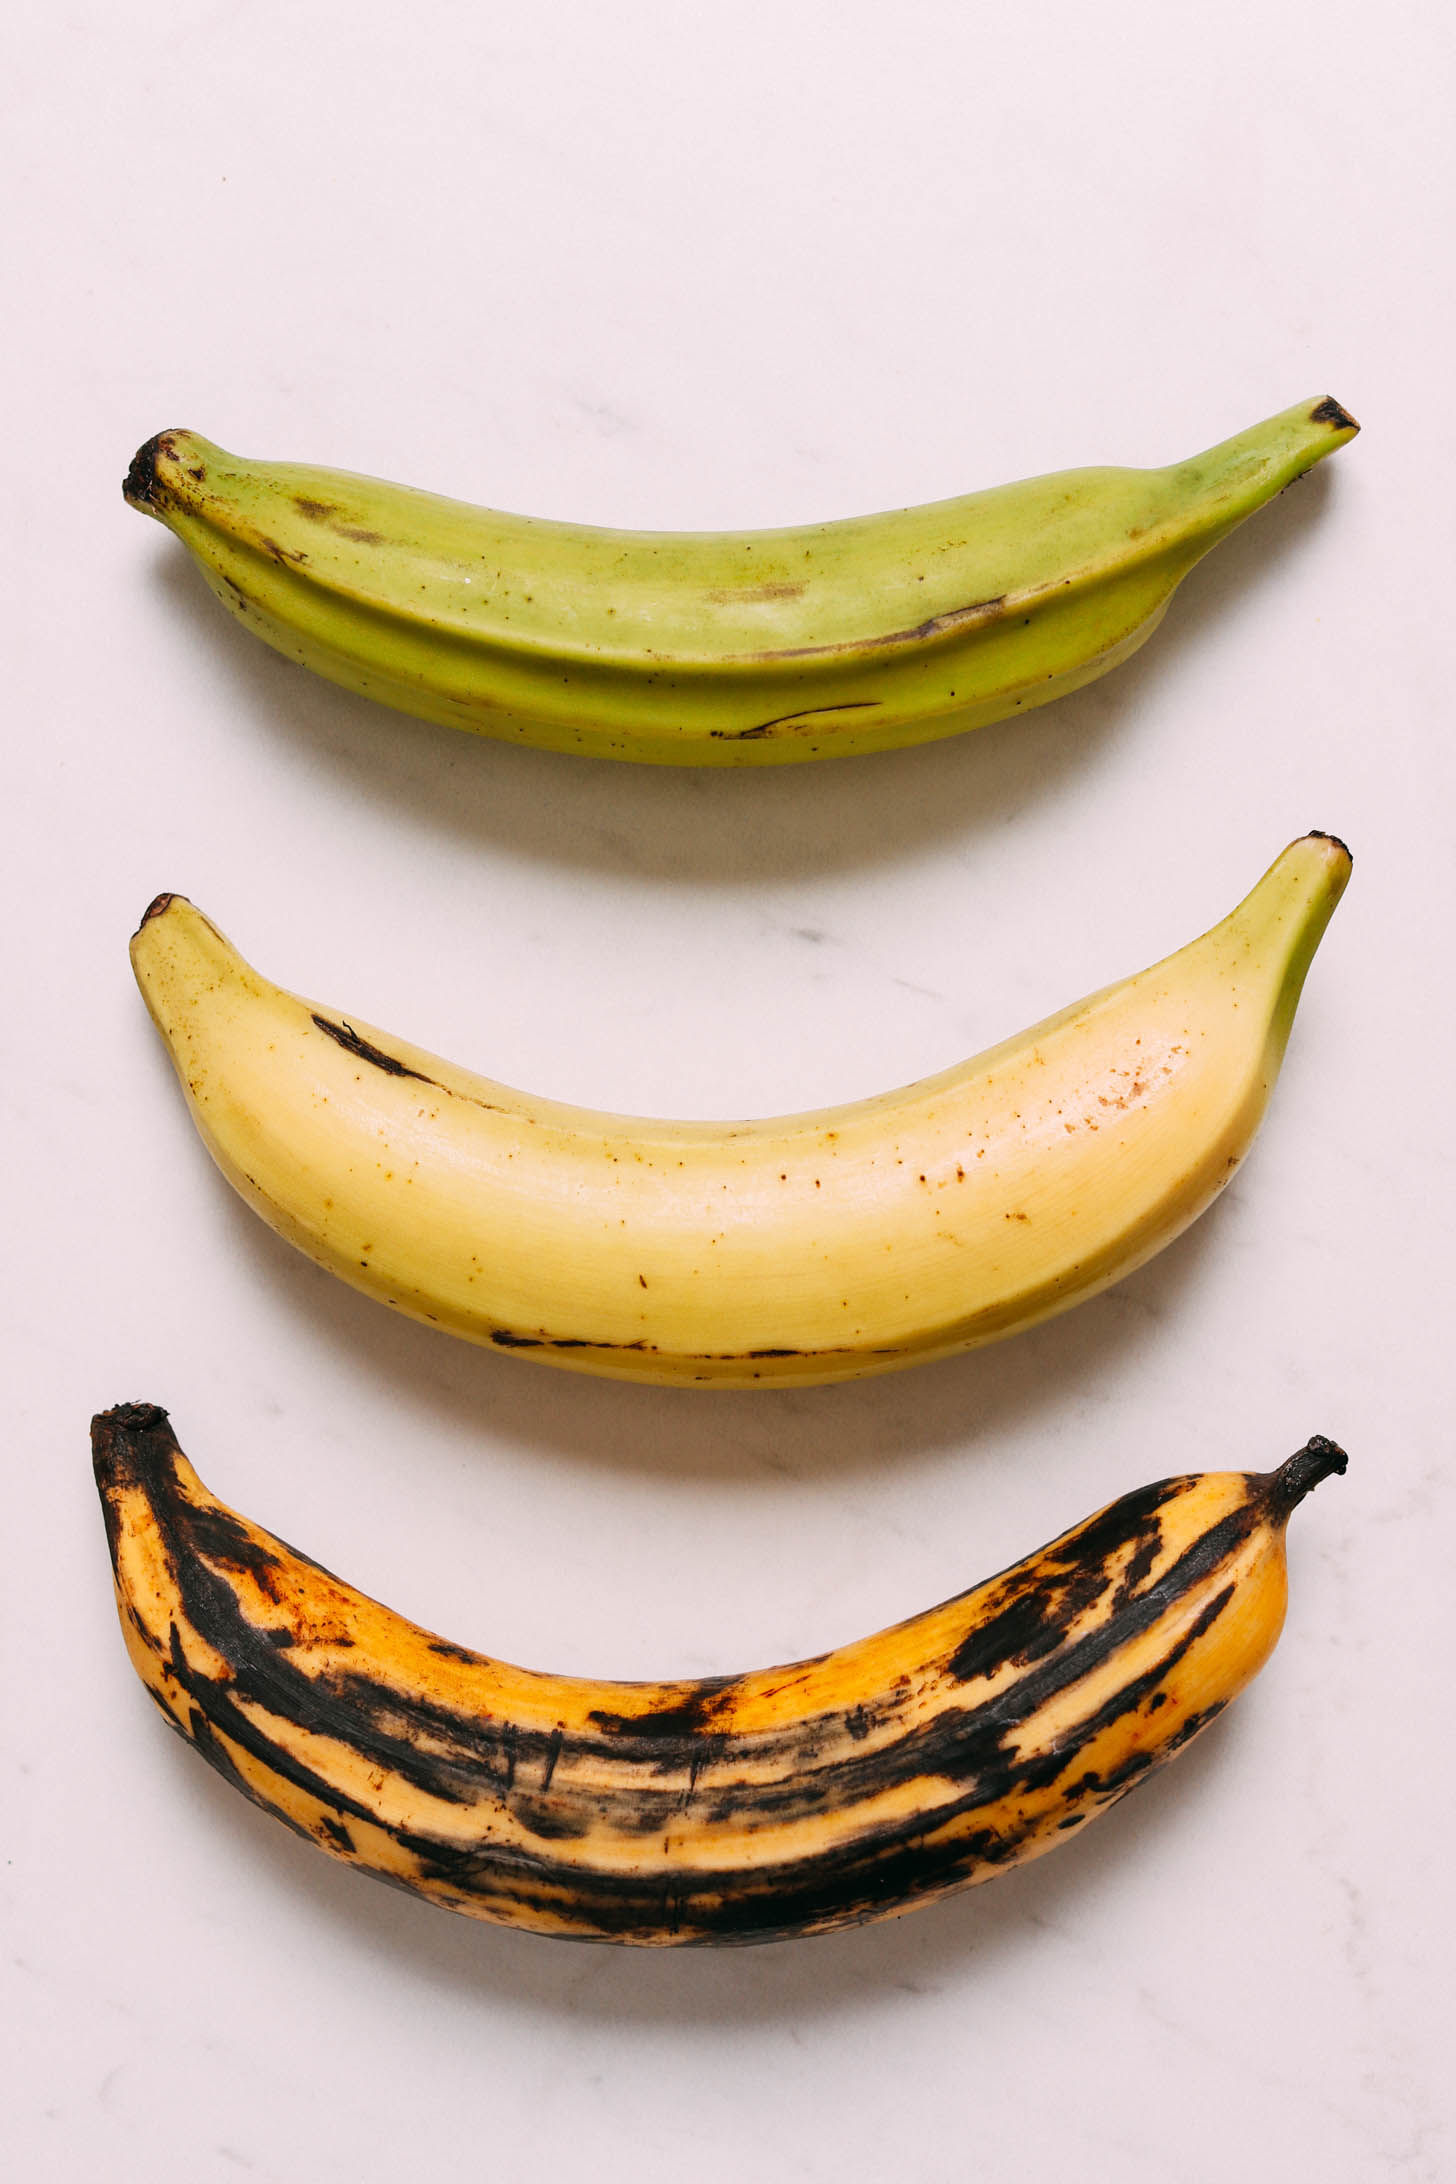 Showing one green, one yellow, and one ripe plantain